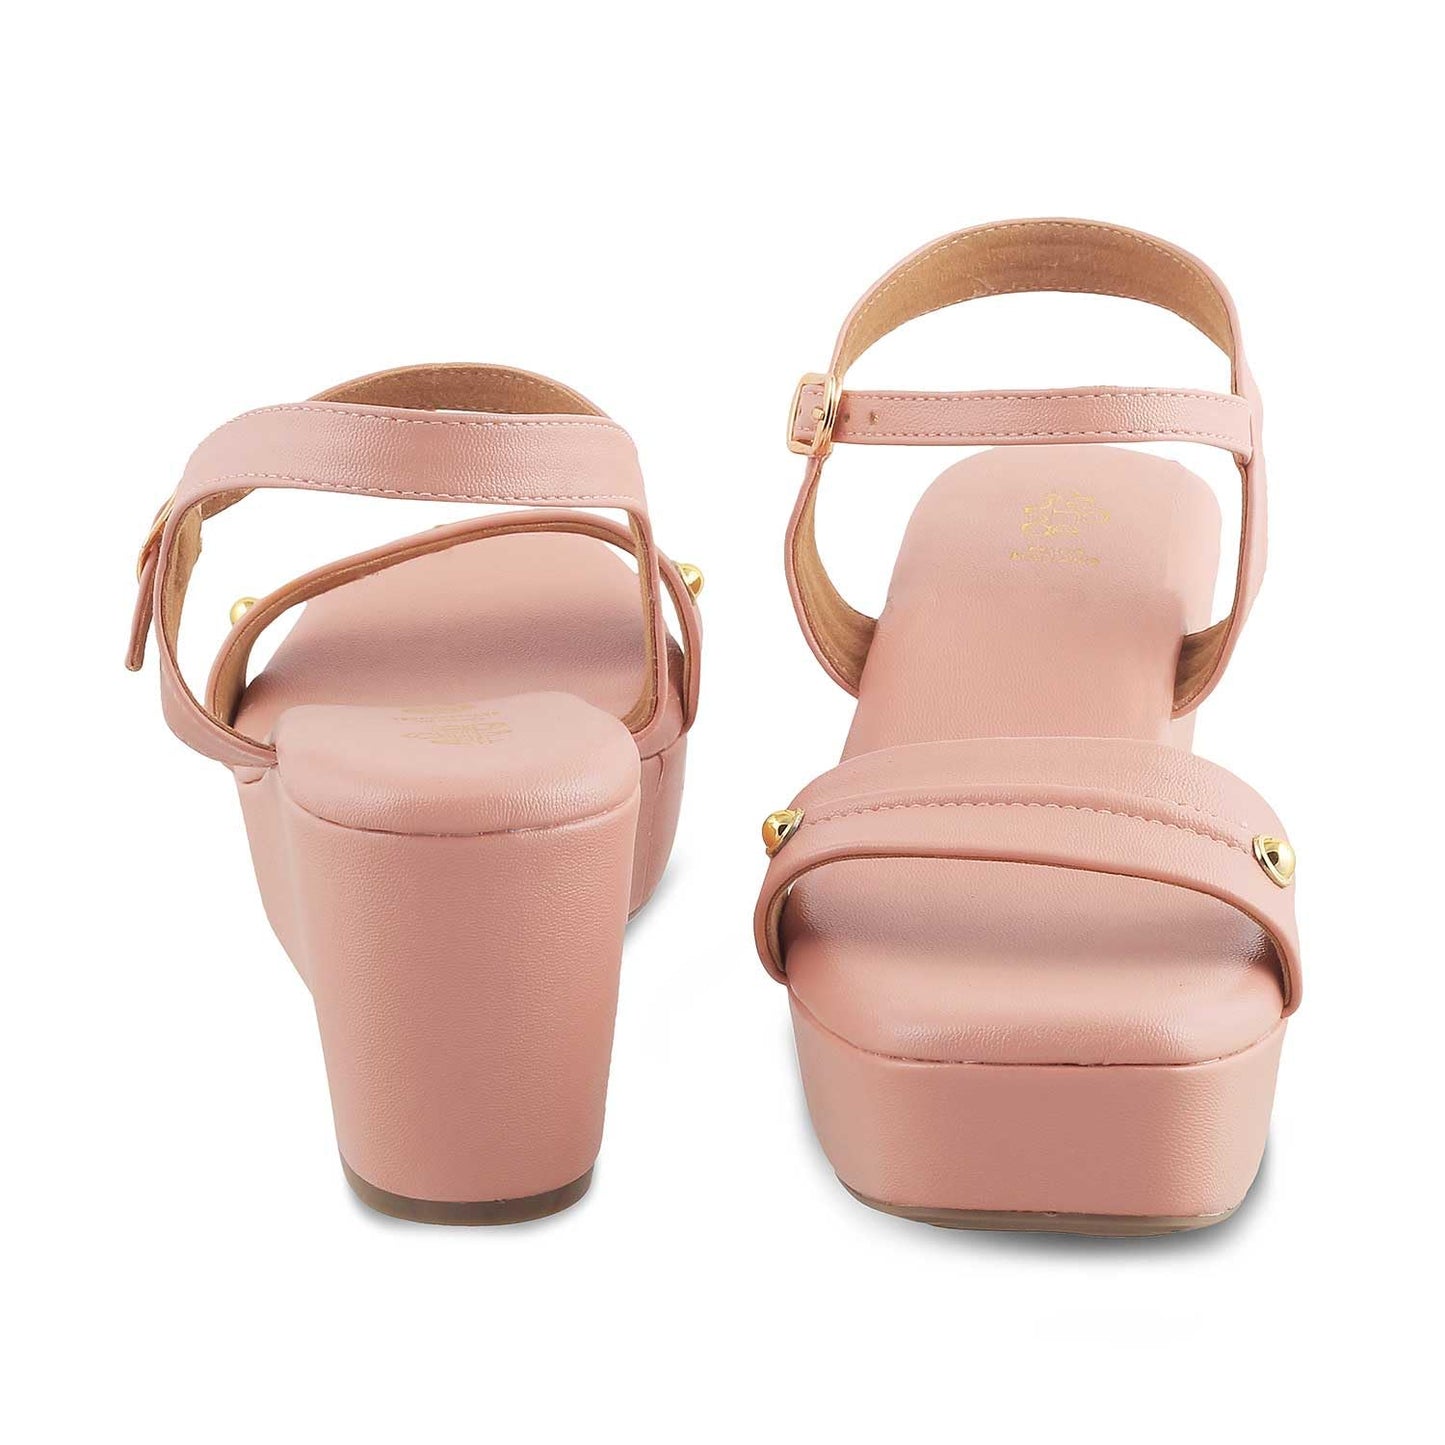 tresmode Amsterdam Pink Women's Dress Wedge Sandals - Elevate Your Style with Elegance and Comfort || Size (EU-39/UK-6/US-8)